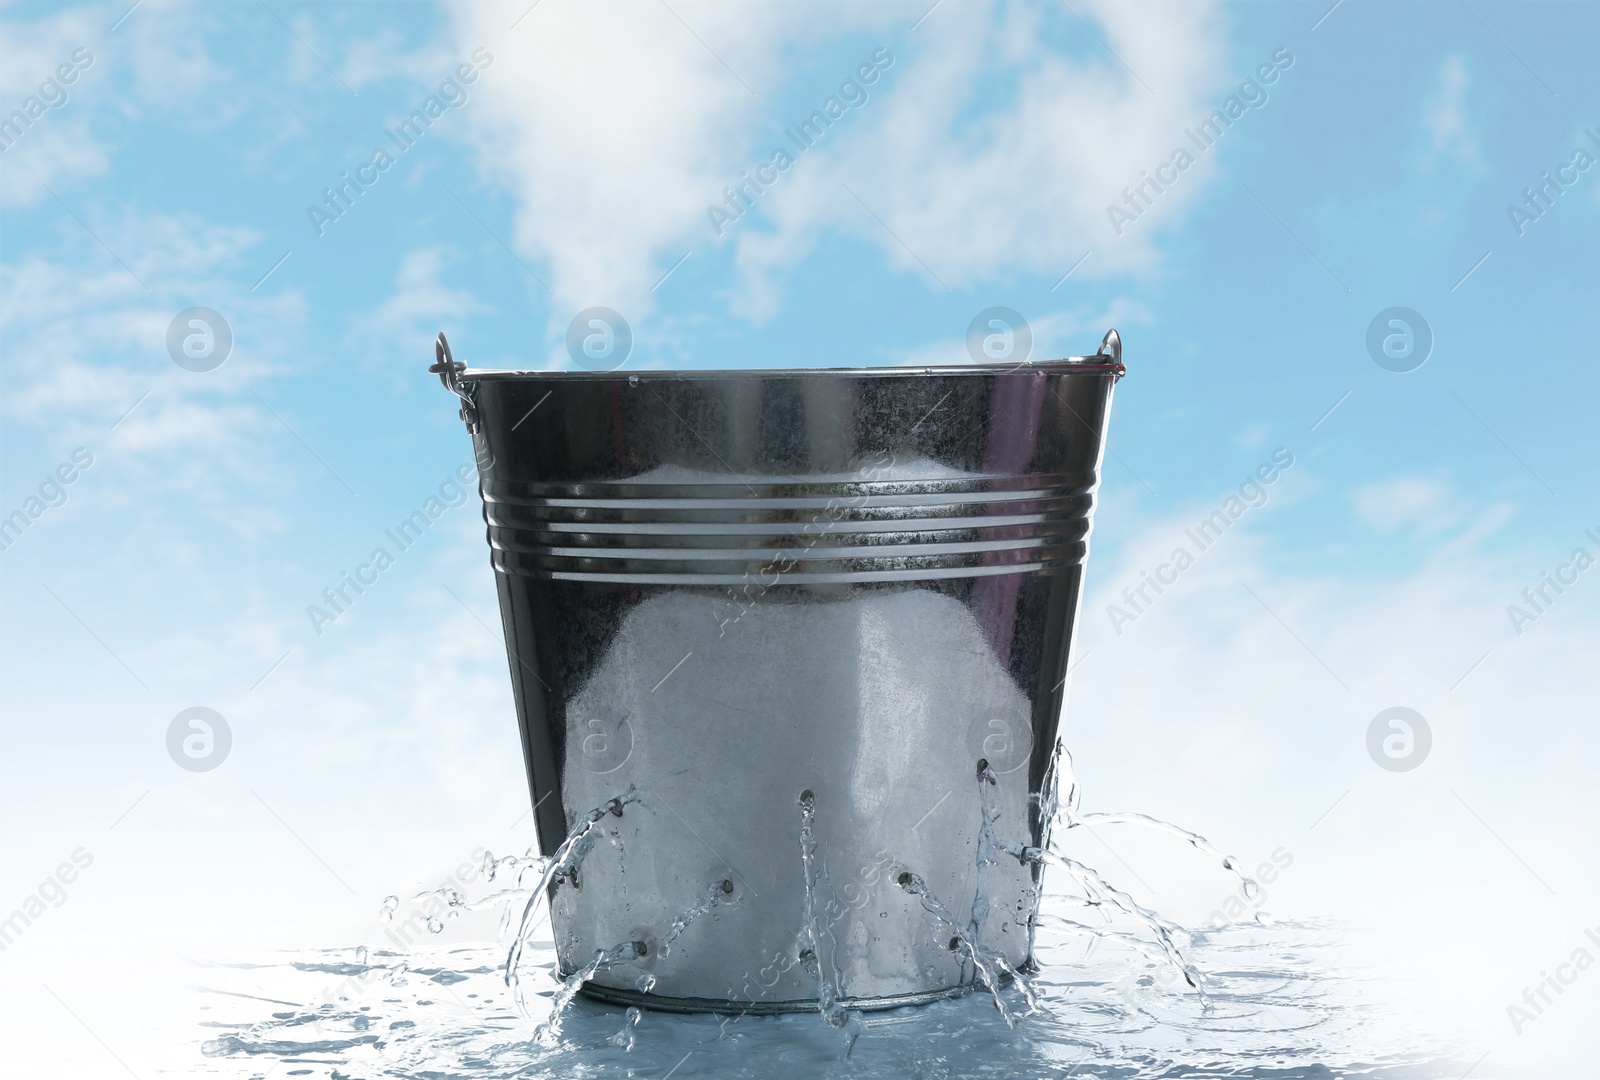 Image of Leaky bucket with water against blue sky 